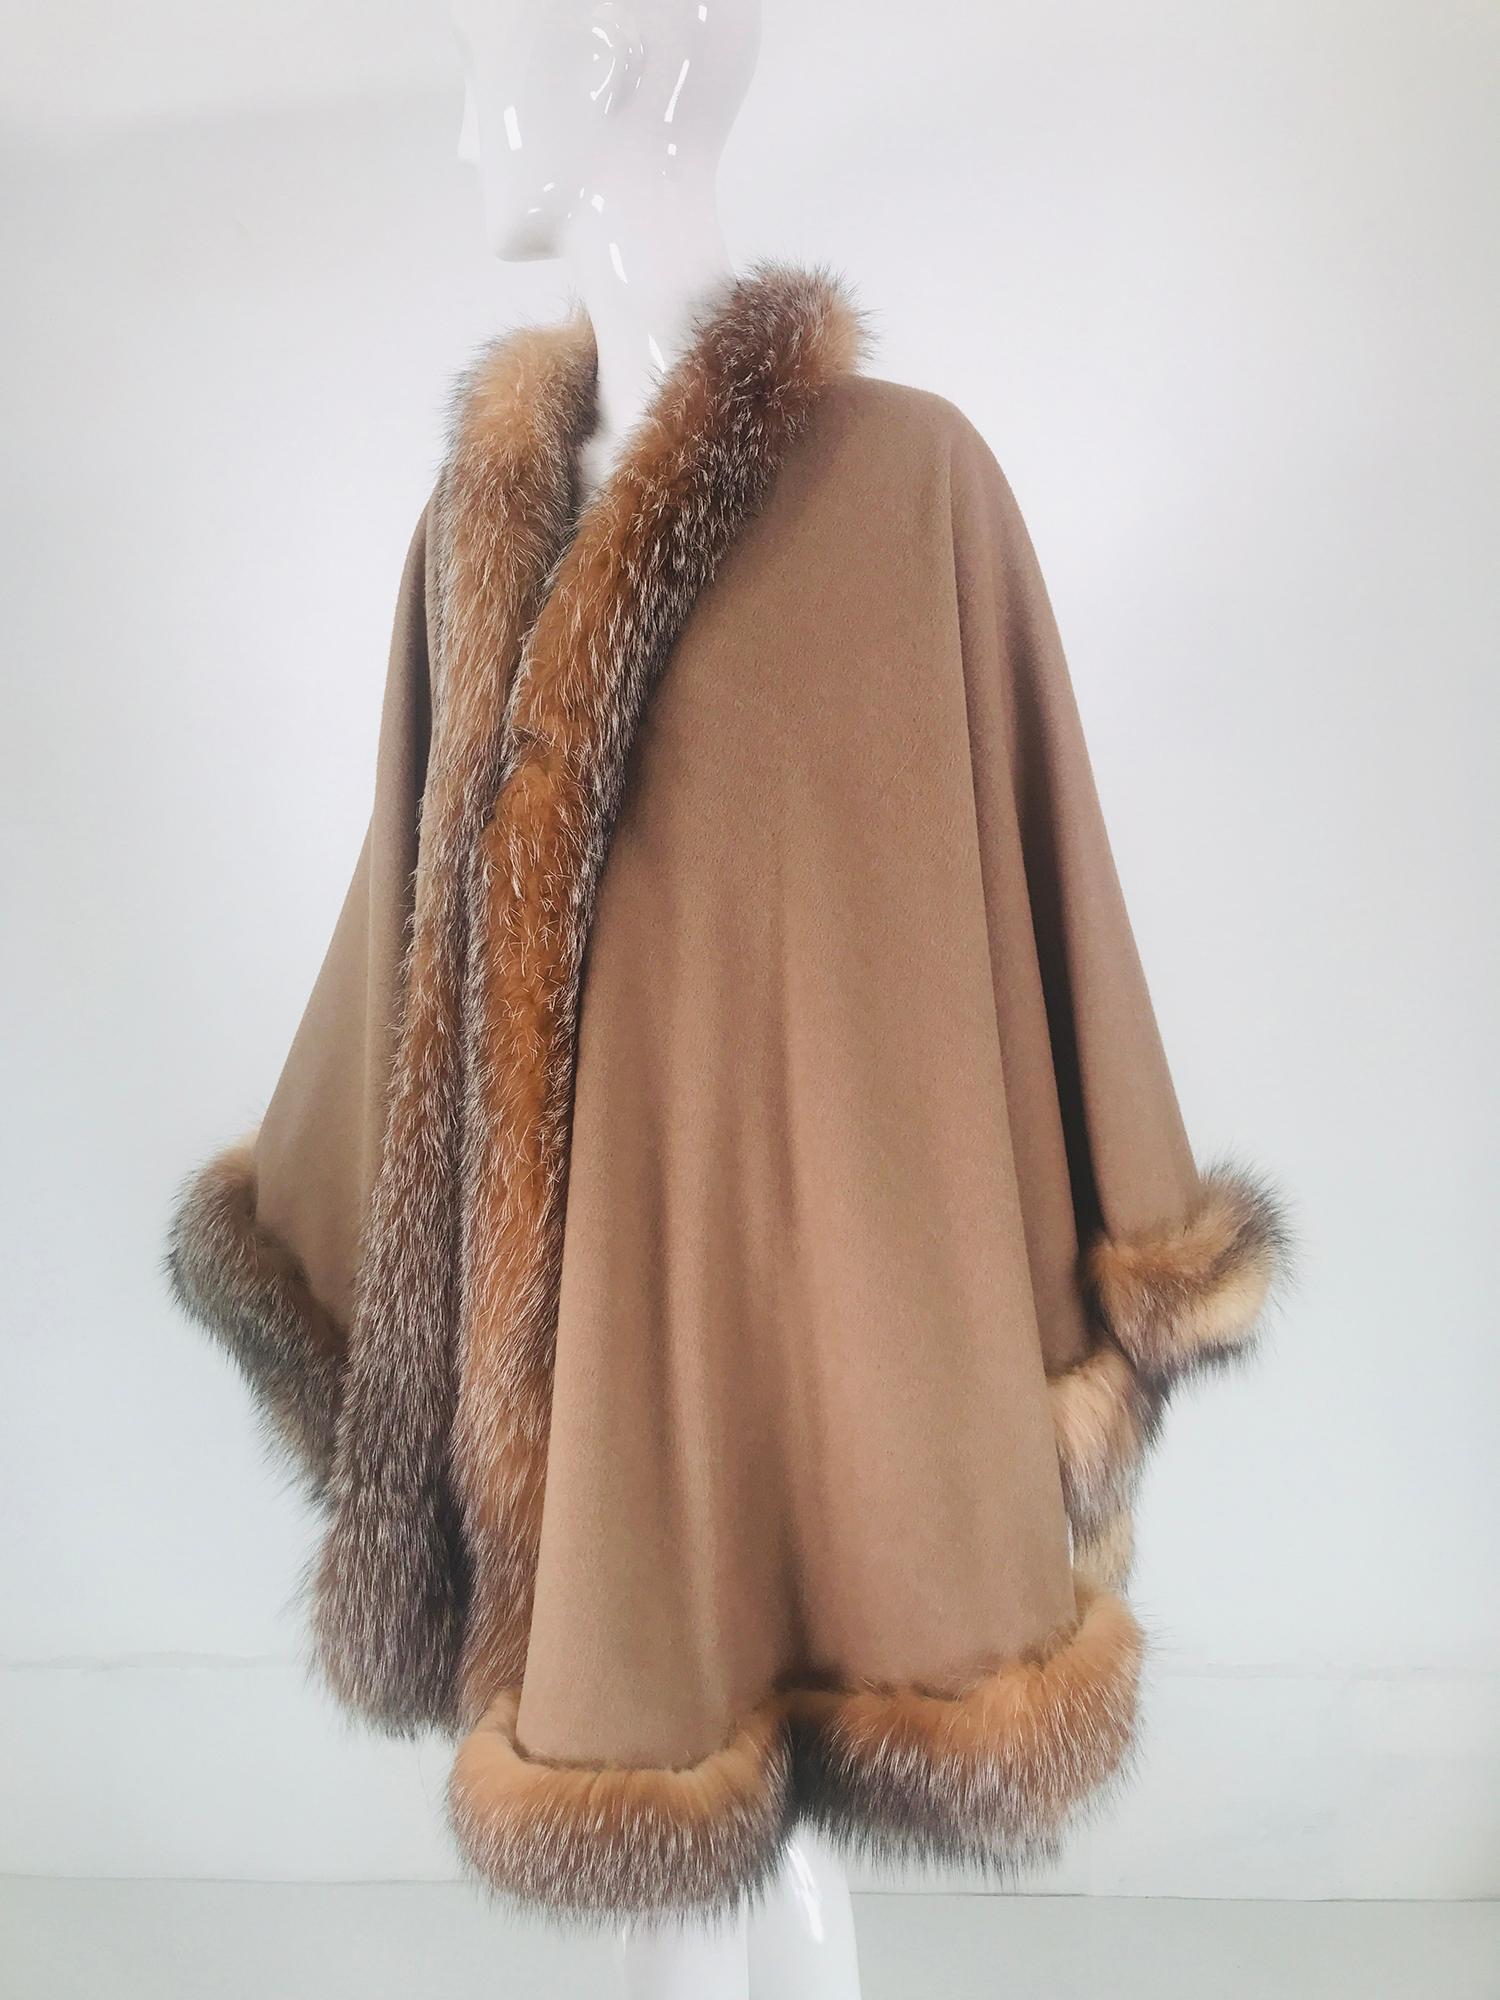 Sprung Freres Paris red fox trim, wool/cashmere blend reversible cape in grey or camel tan. A beautiful cape that is below hip length, it is full and trimmed in rare red fox. The cape is open at the front, there are no closures. 
The fabric is soft